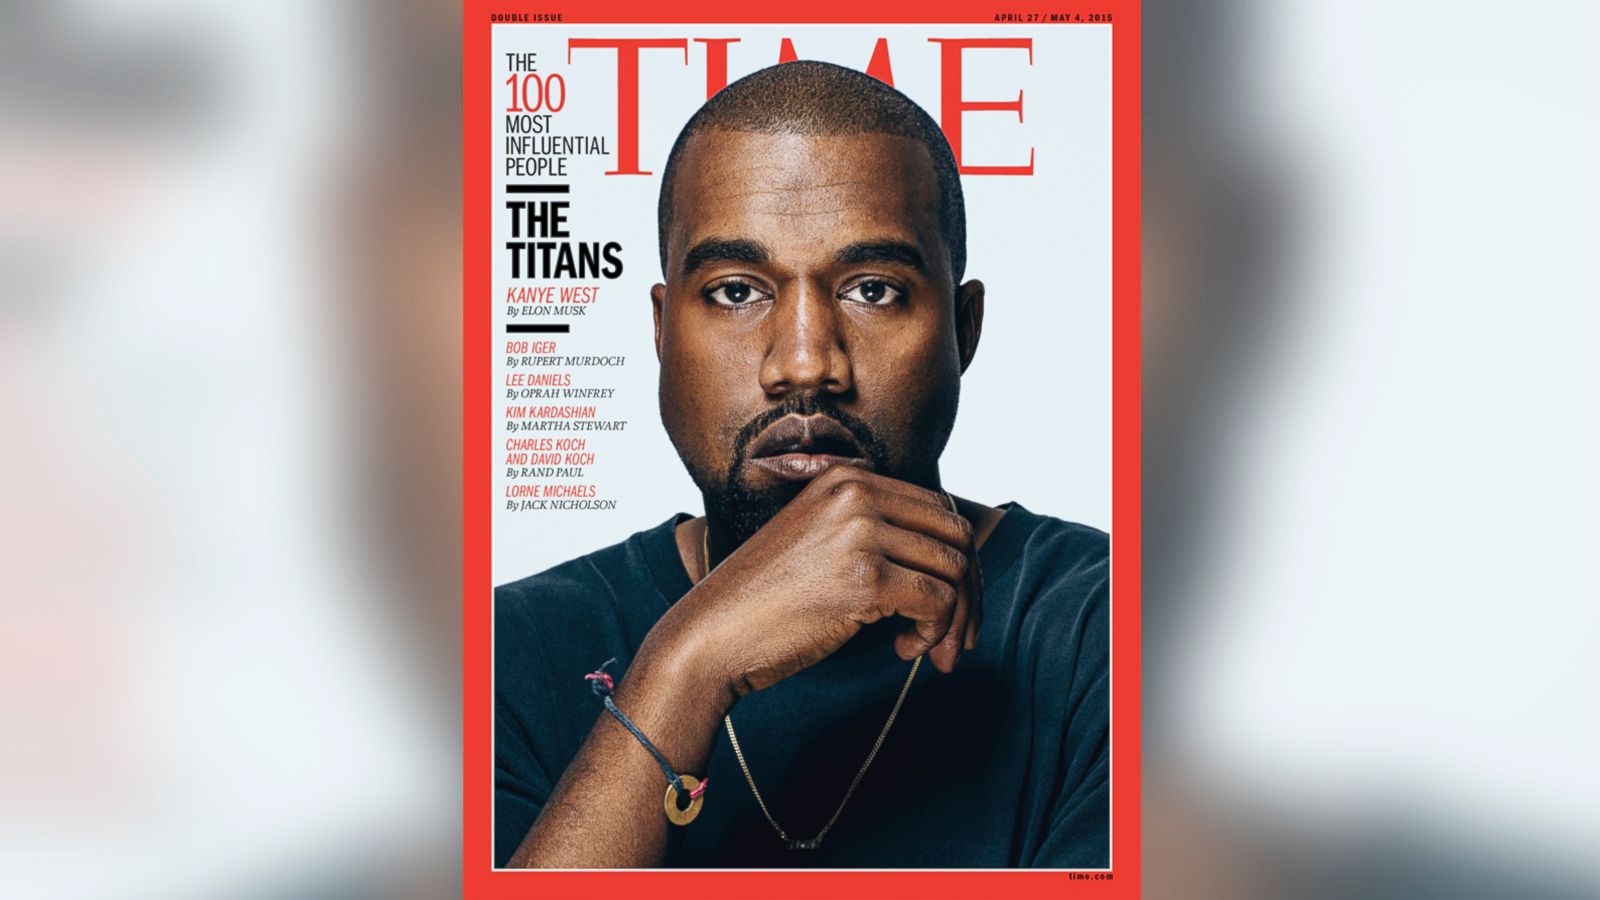 Kanye West Tops Time's List of 100 Most Influential People - ABC News